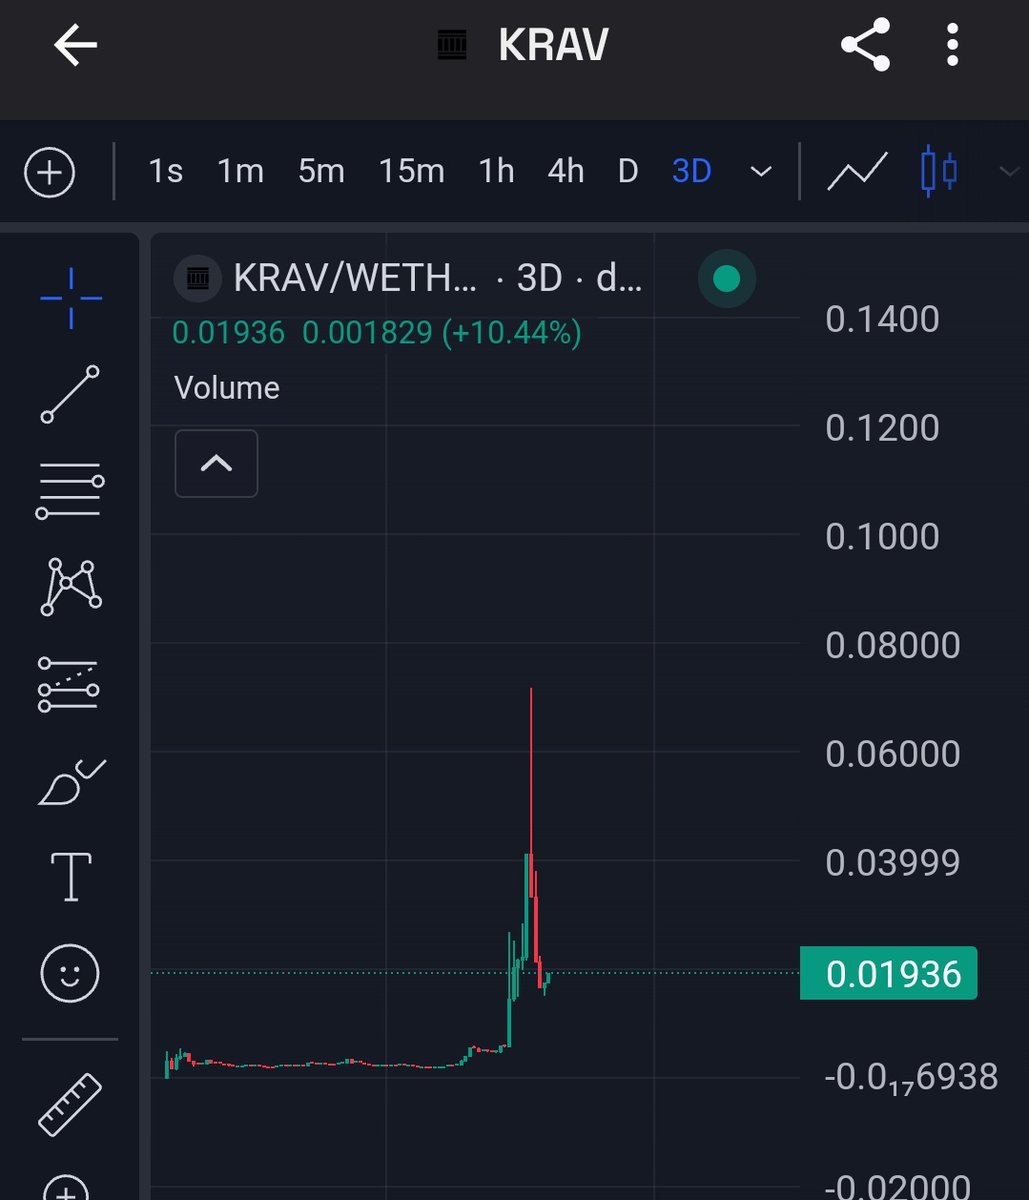 $KRAV getting ready for new ATHs, price discovery soon. @kravtrade remains the first perp dex on Base network and plans a token migration soon. Old tokenholders can buy and stake the old token for auto-conversion to the new one. ca: 0xbE3111856e4acA828593274eA6872f27968C8DD6